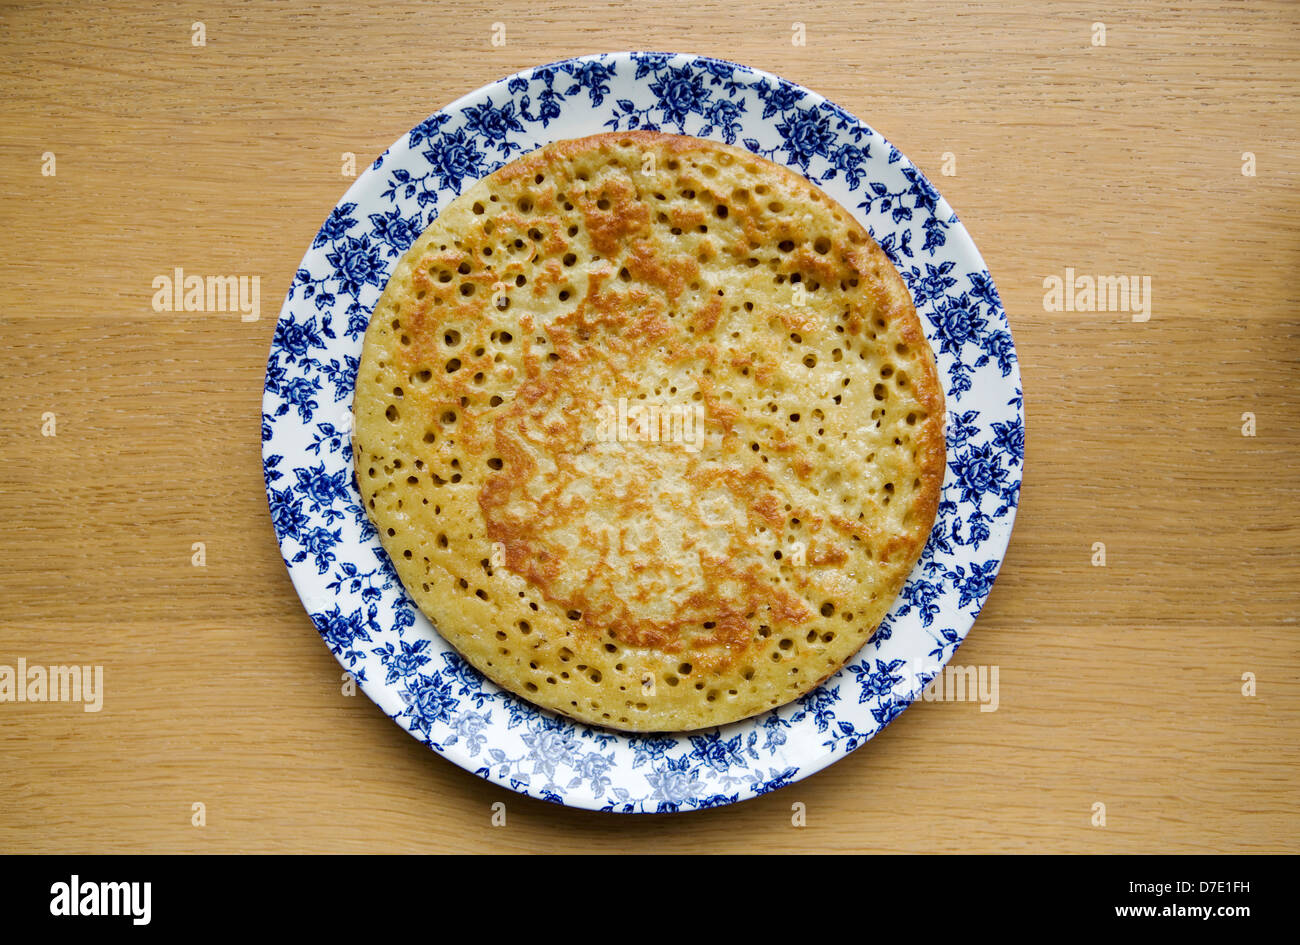 Homemade crumpet on a vintage floral plate Stock Photo